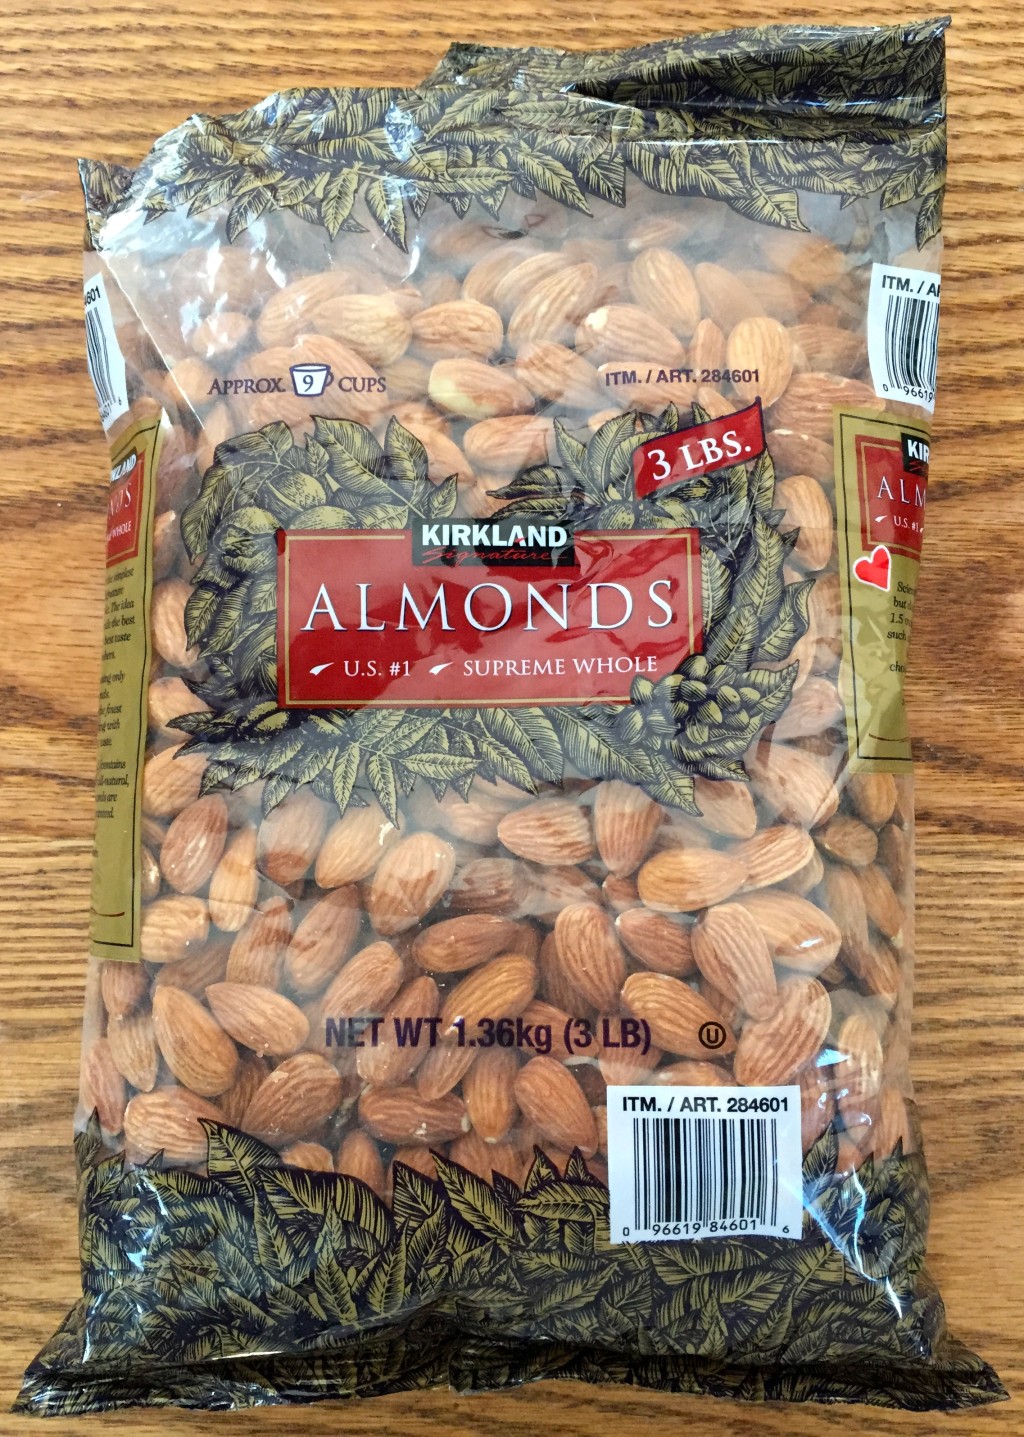 i buy my nuts in bulk at Costco. because you can never have enough in the pantry.